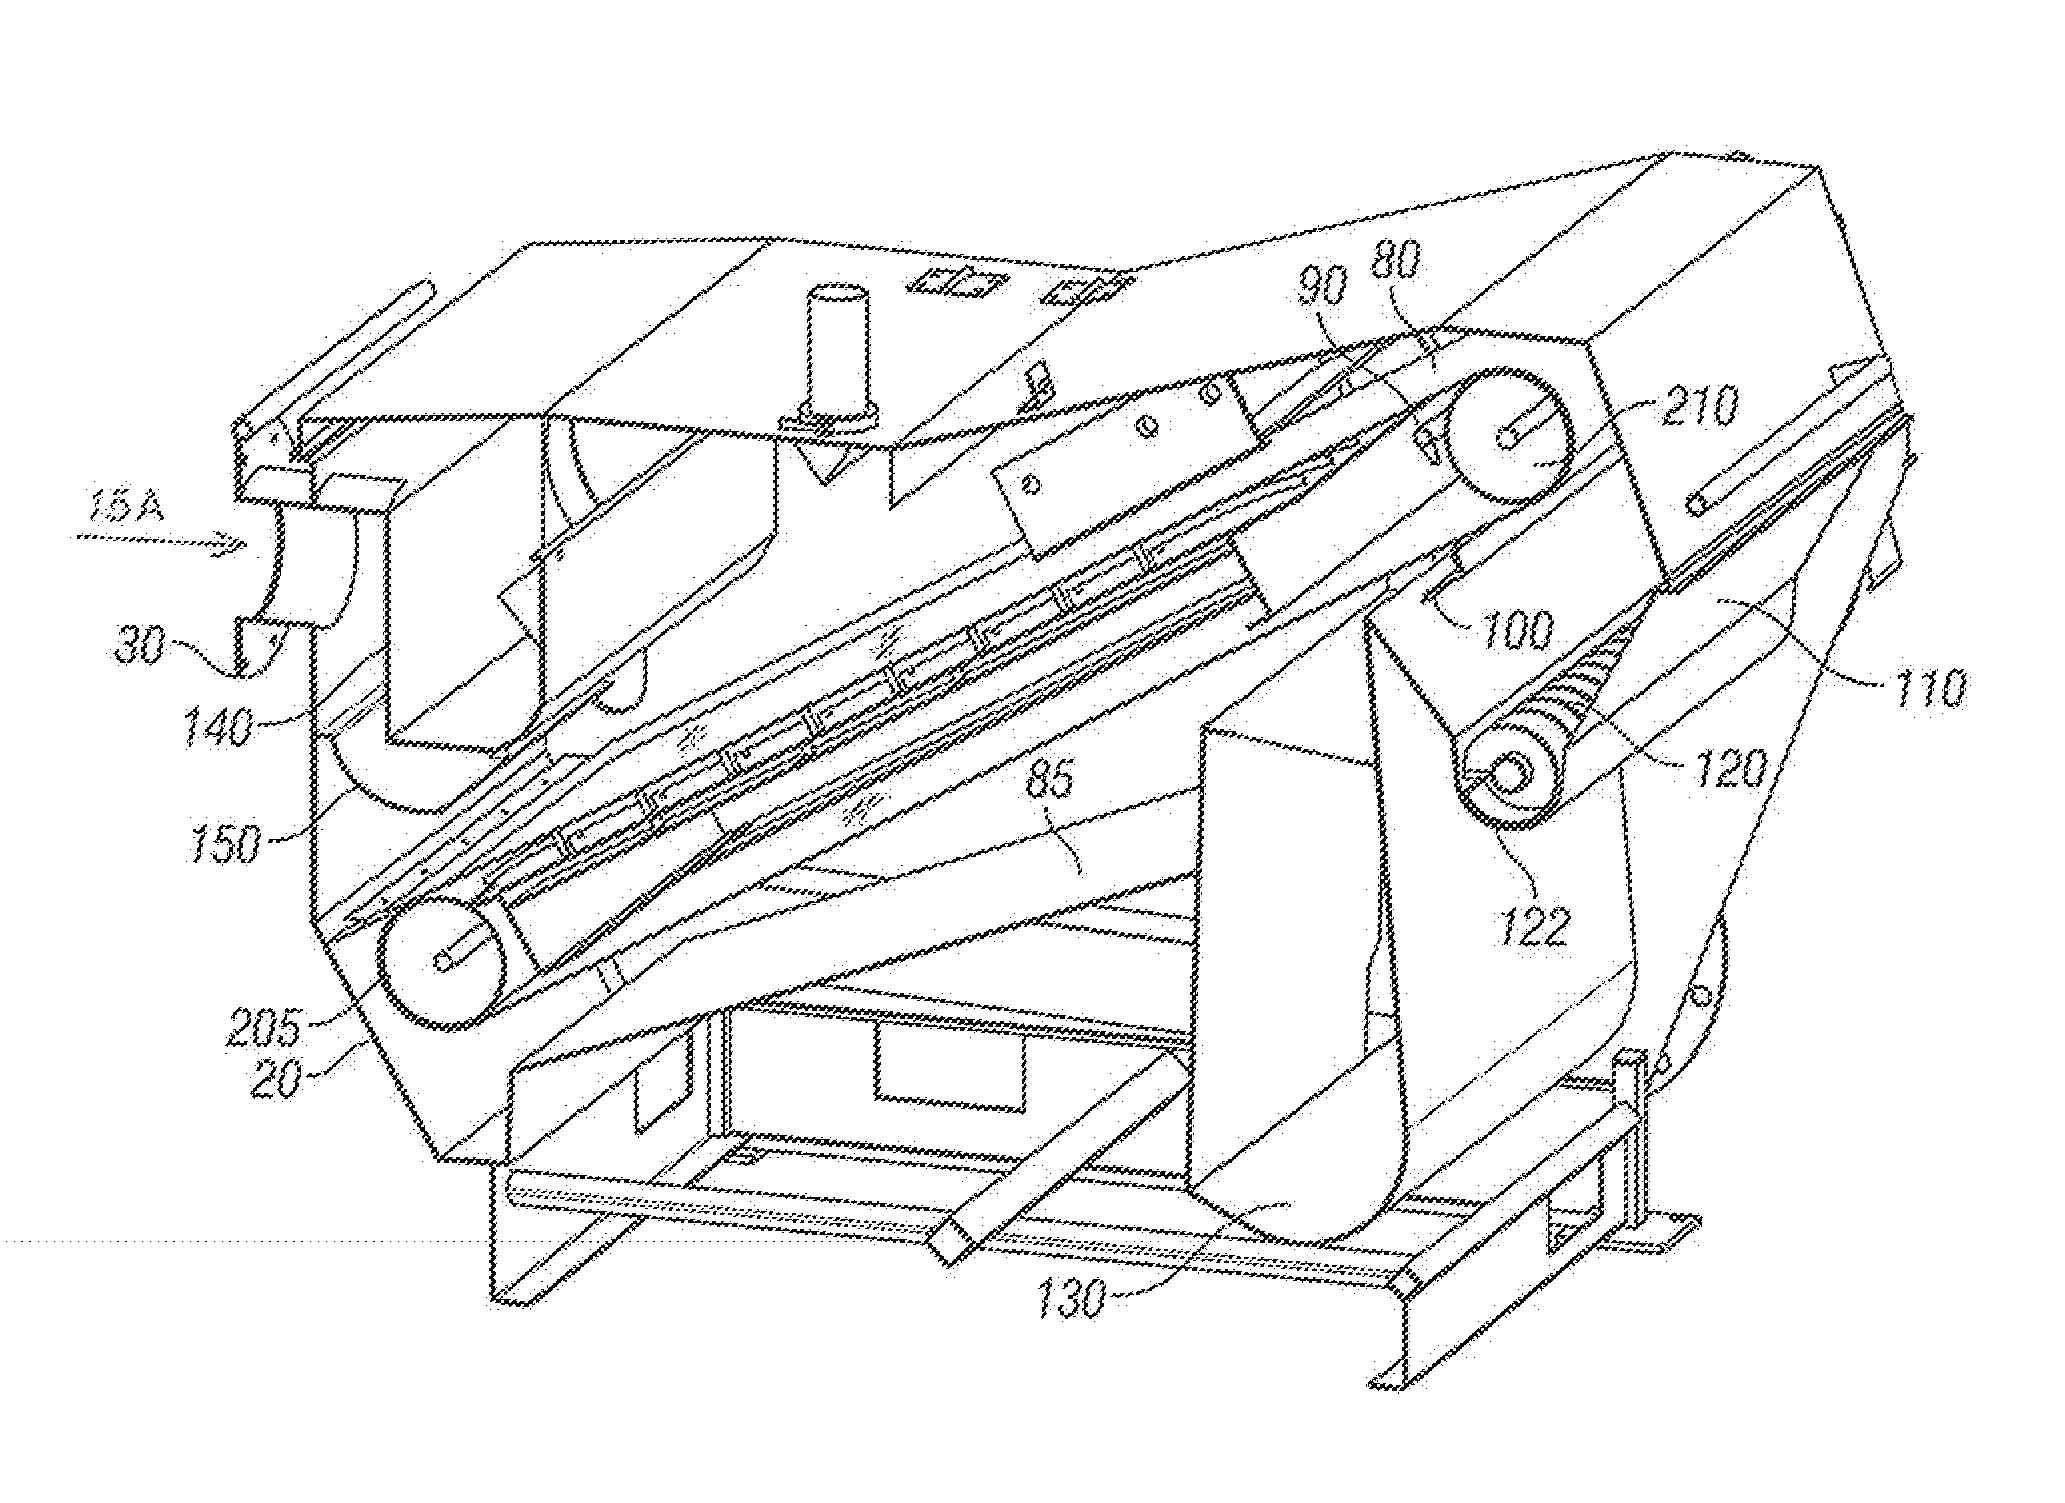 Industrial separator and dewatering plant